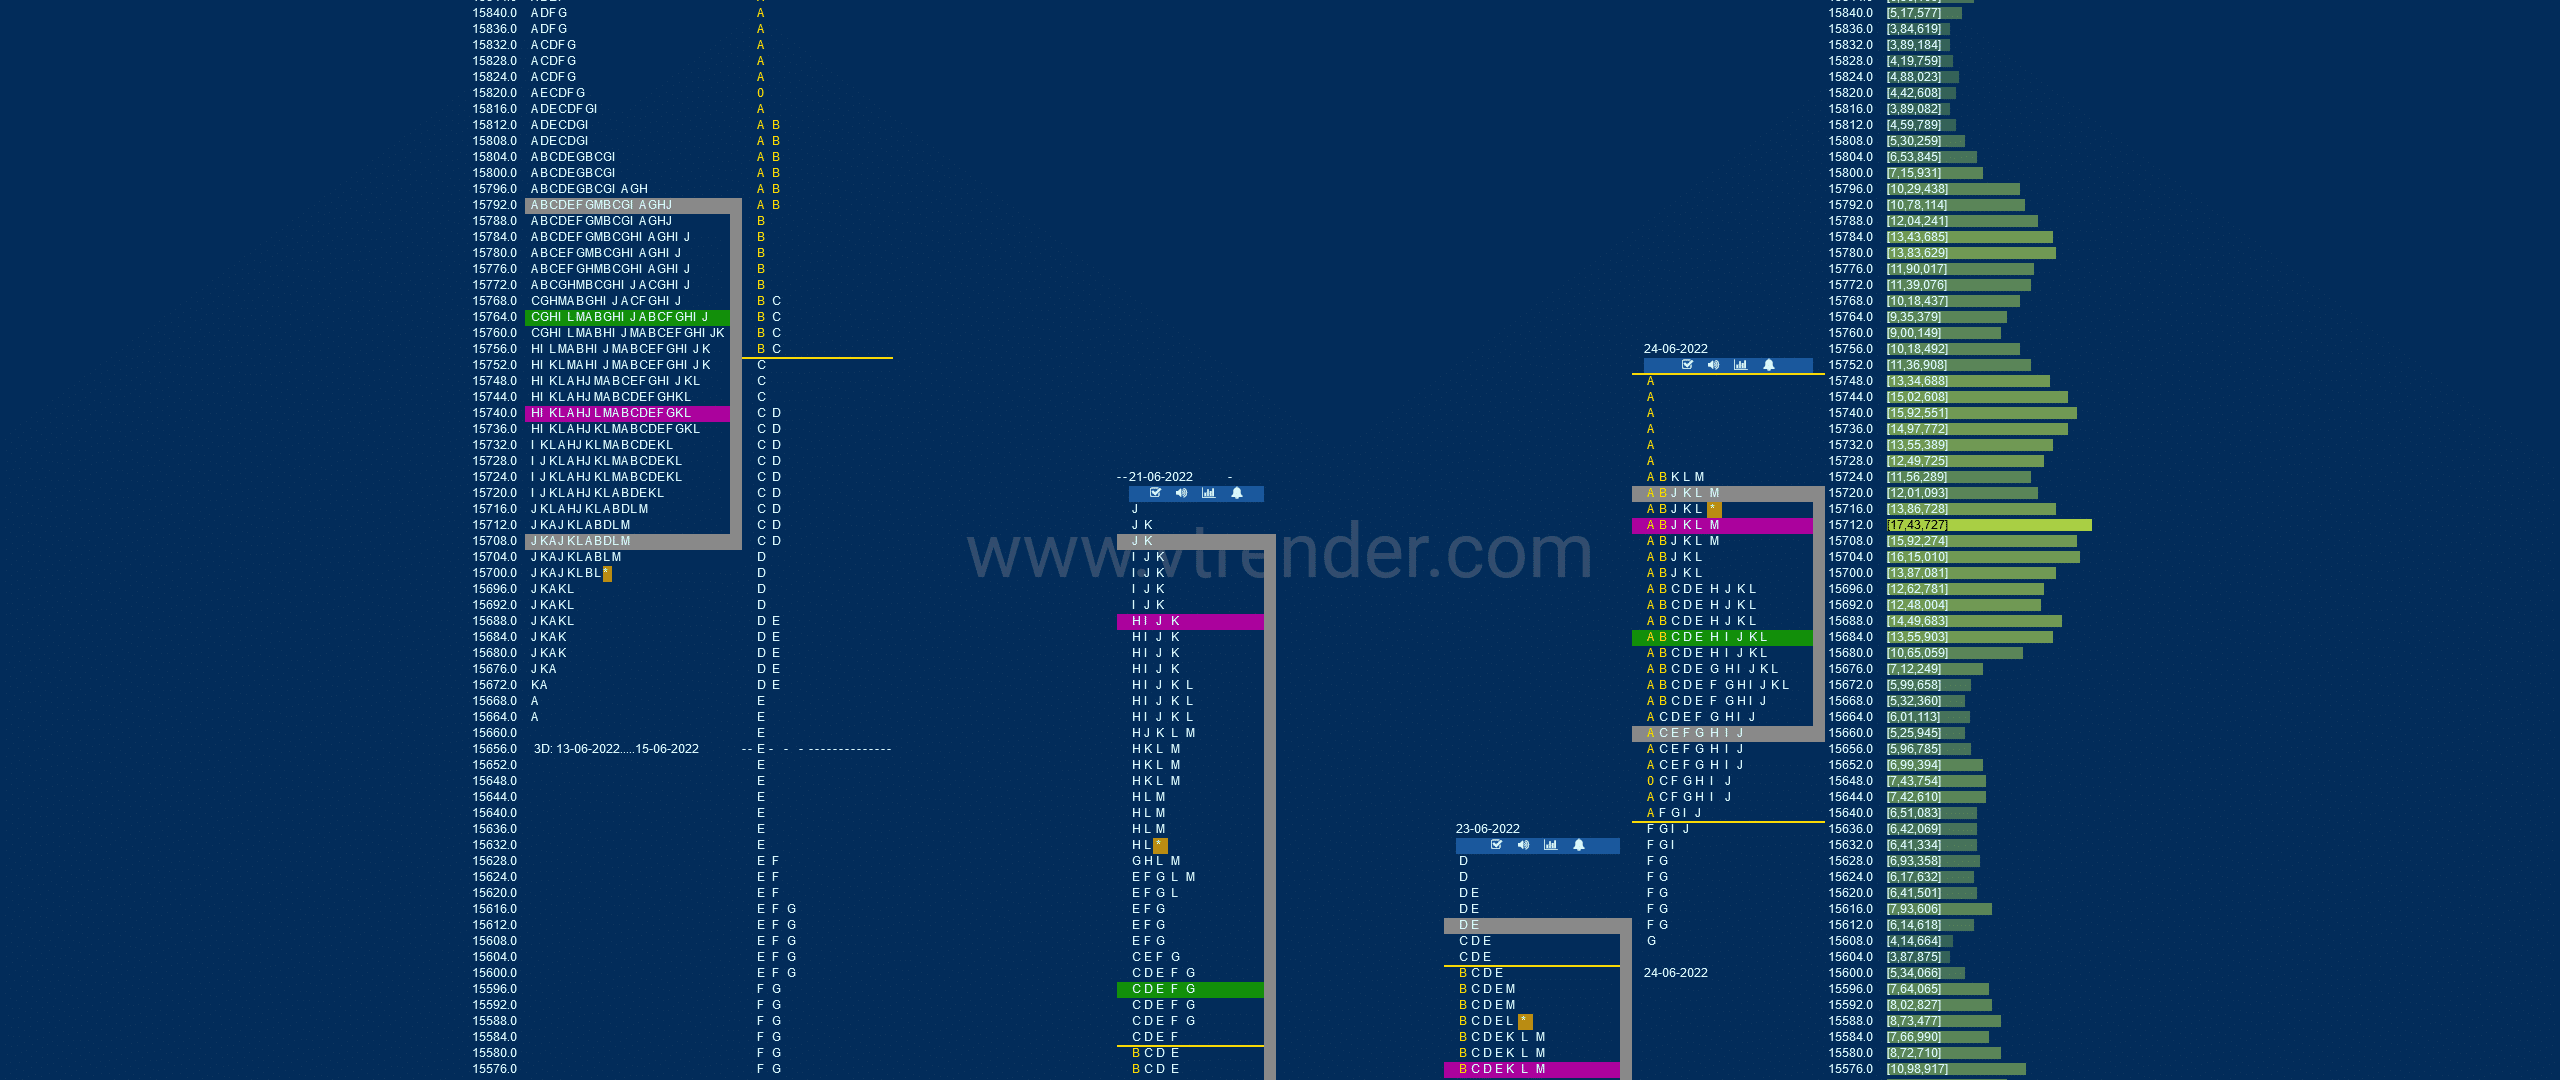 Nf 18 Market Profile Analysis Dated 24Th Jun 2022 Banknifty Futures, Charts, Day Trading, Intraday Trading, Intraday Trading Strategies, Market Profile, Market Profile Trading Strategies, Nifty Futures, Order Flow Analysis, Support And Resistance, Technical Analysis, Trading Strategies, Volume Profile Trading